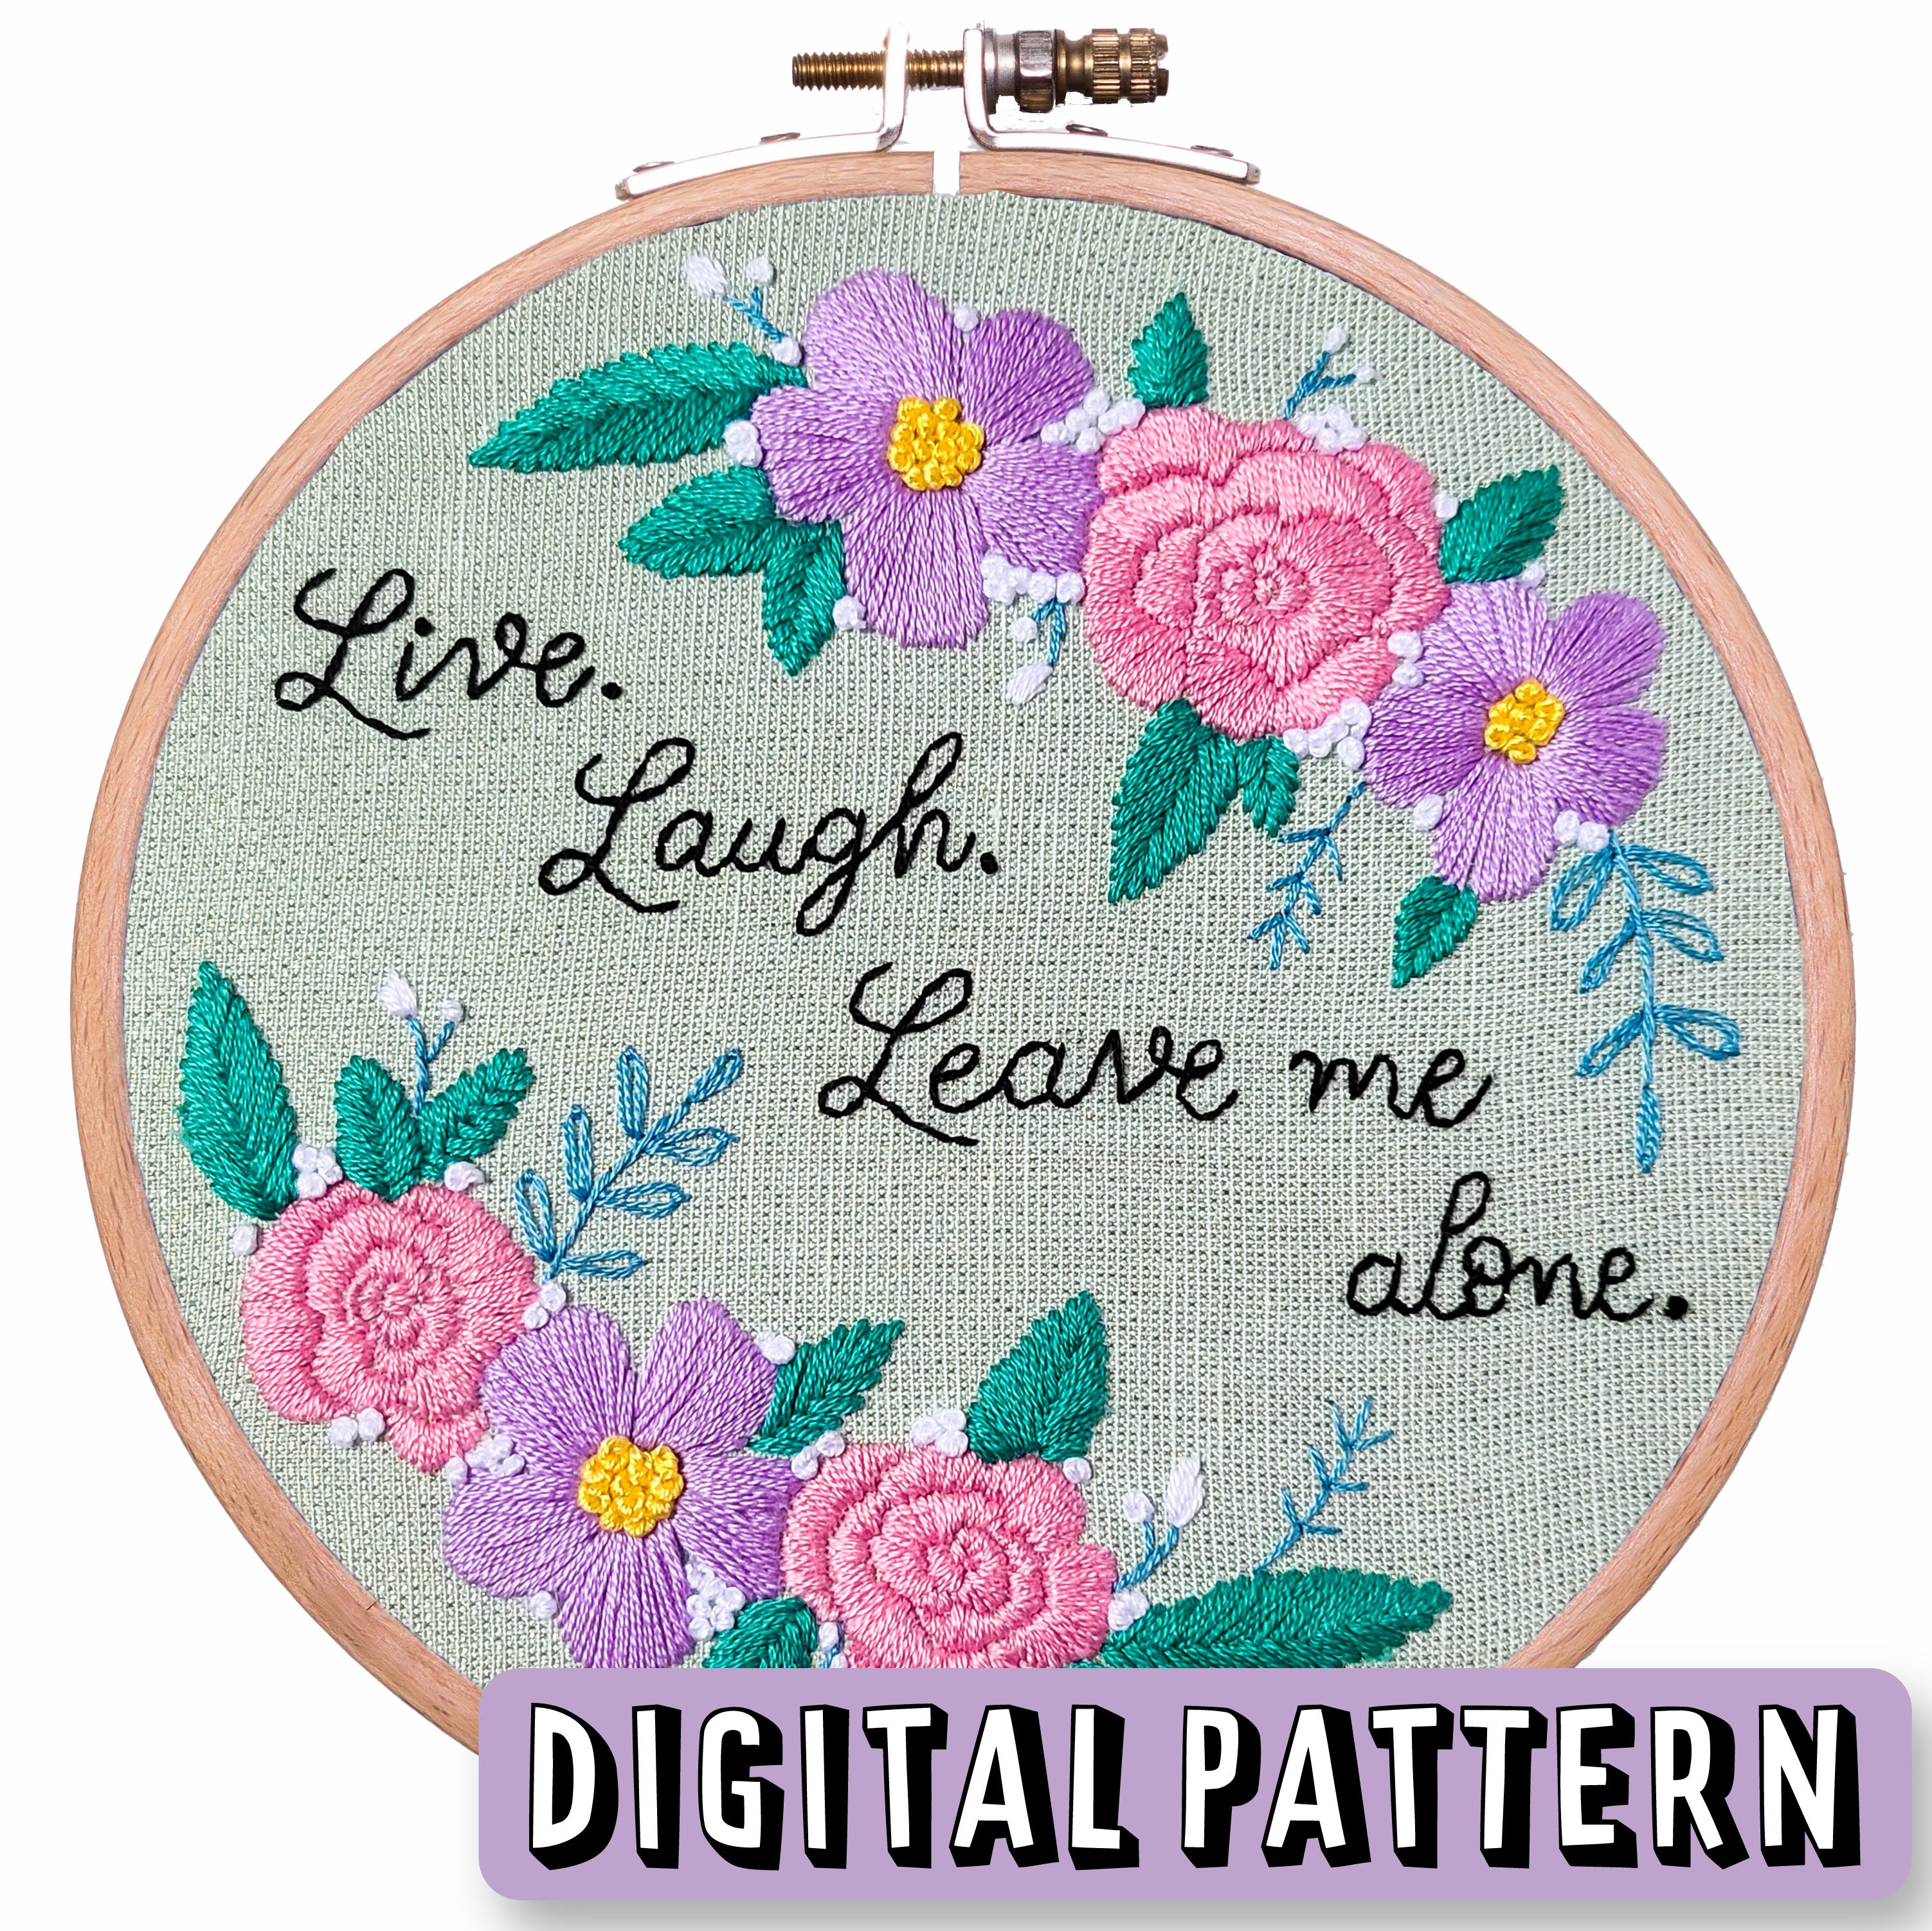 Digital Embroidery Pattern - Life. Laugh. Leave me alone. – Pretty